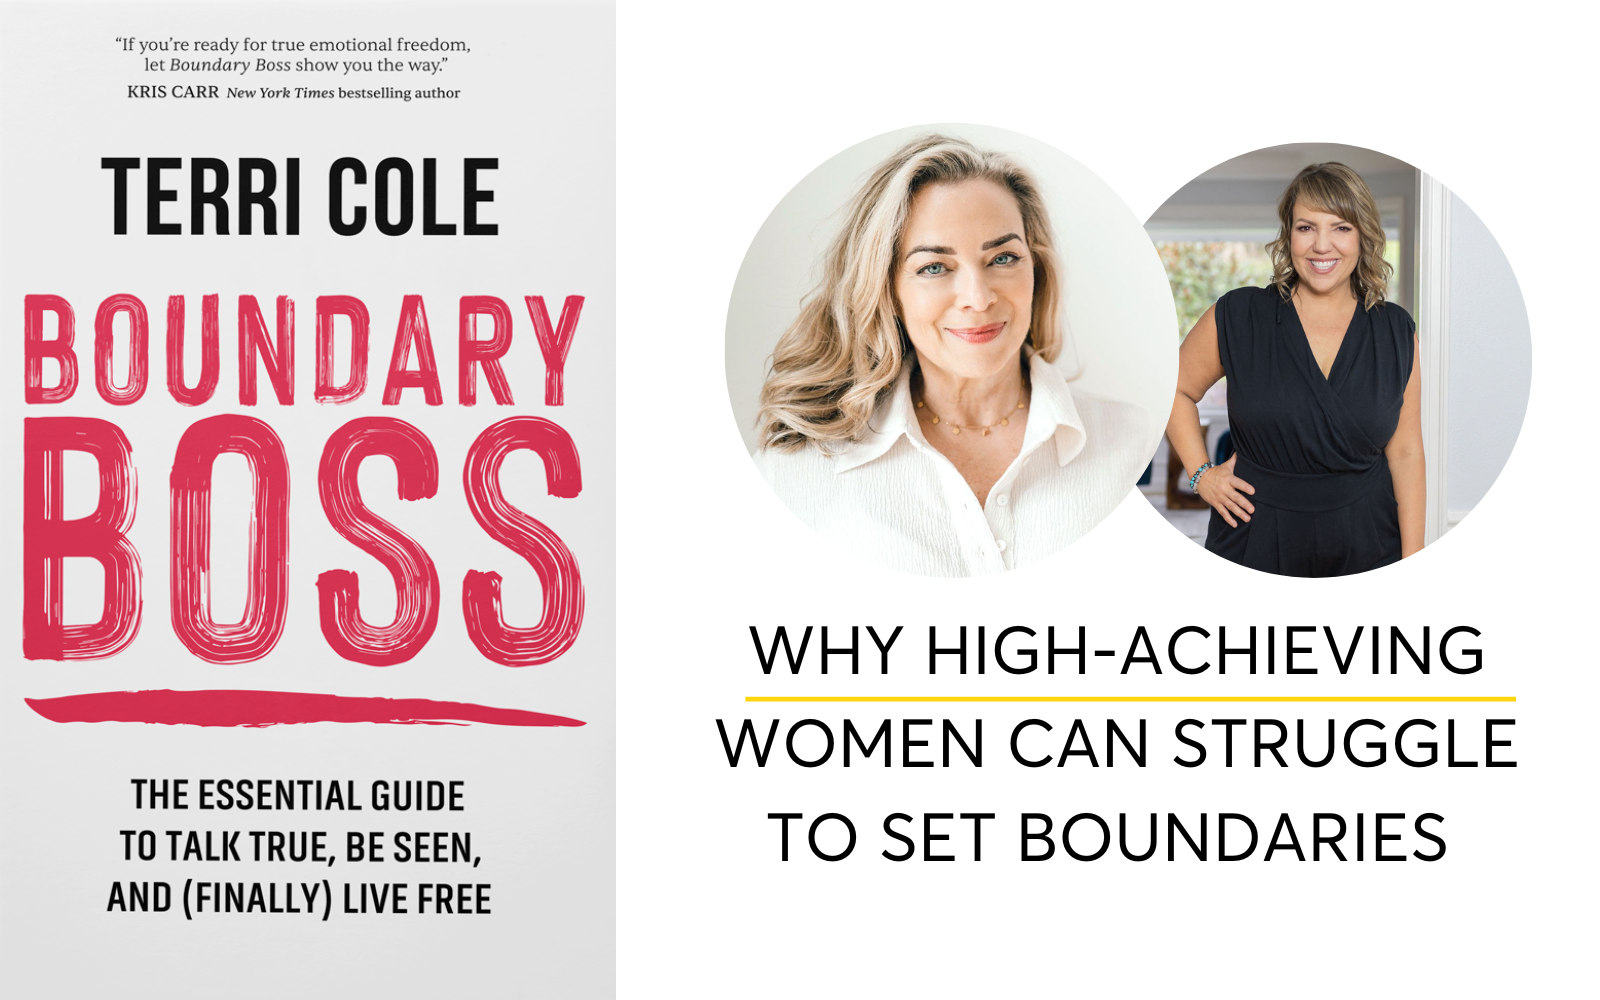 Why High-Achieving Women Struggle To Set Boundaries